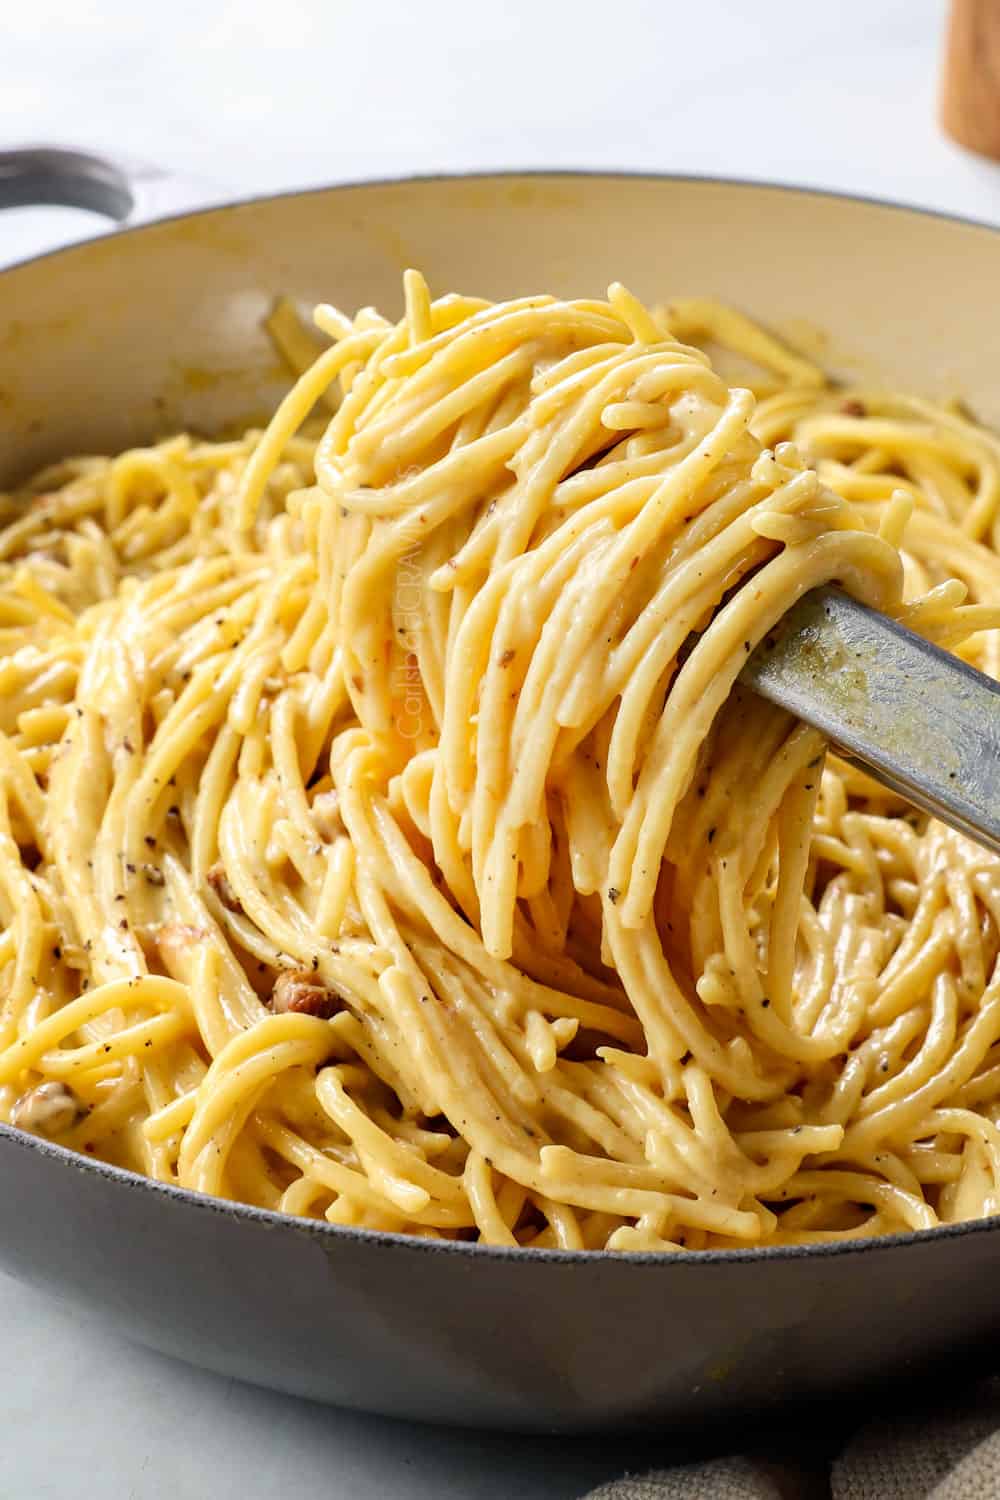 showing how to make carbonara recipe by tossing pasta with egg sauce showing how creamy it is